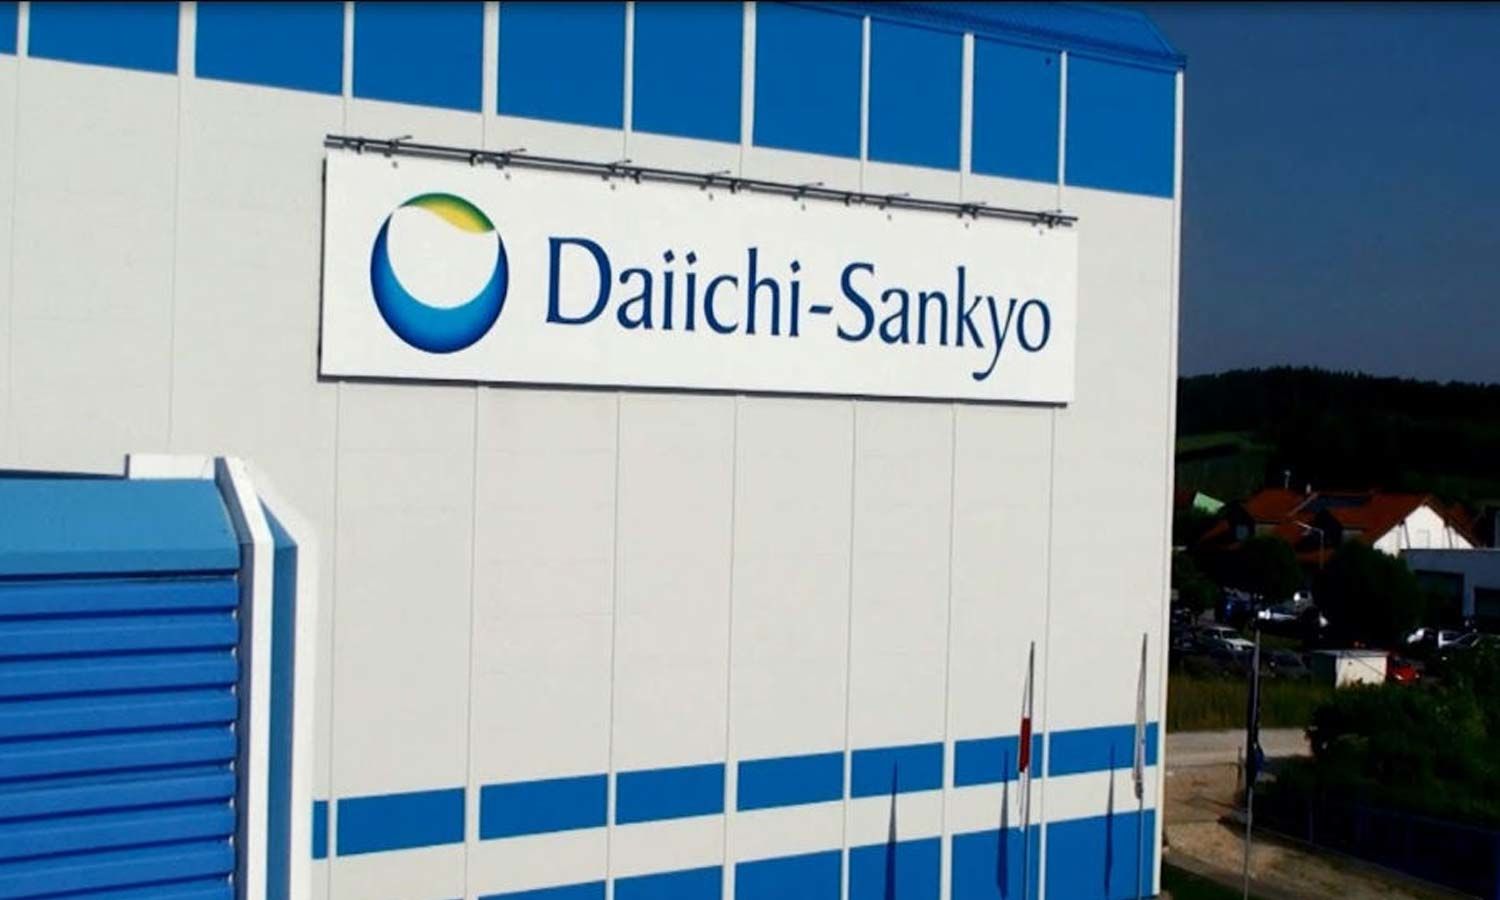 Daiichi Reports EMA's Validation of MAA and Accelerated Assessment for Trastuzumab Deruxtecan to Treat HER2 Positive Metastatic Breast Cancer